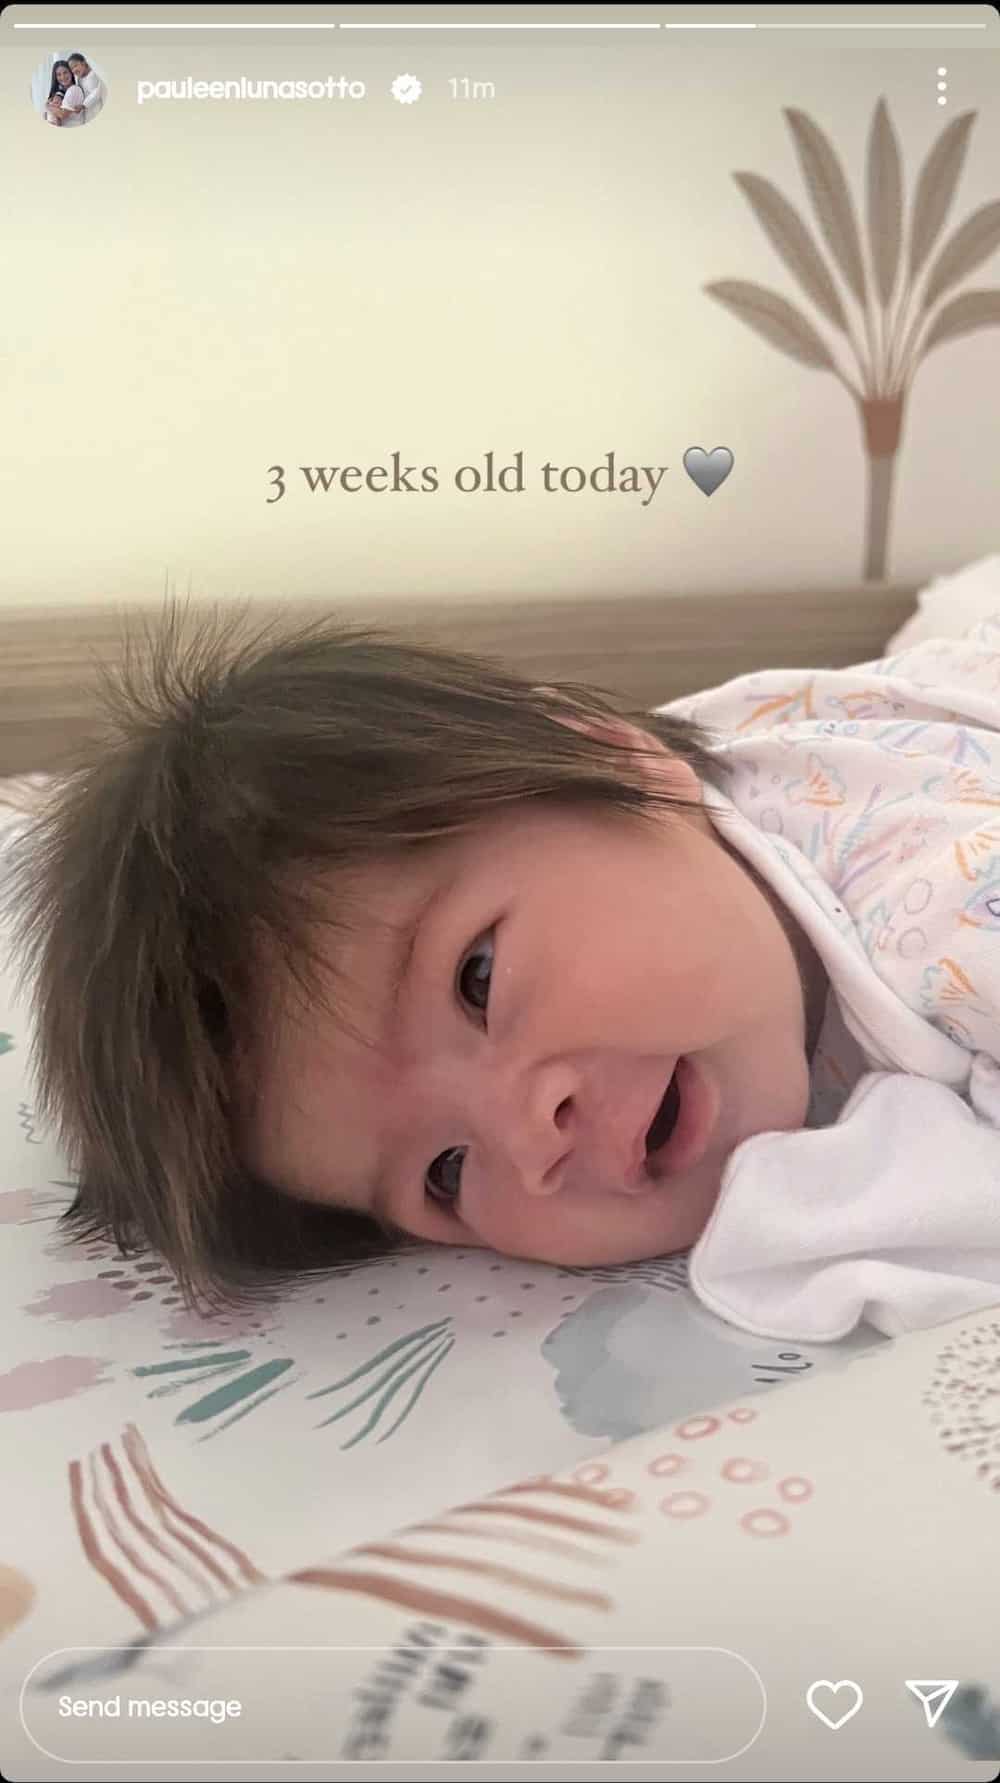 Pauleen Luna shares new photo of Baby Thia Marceline: "3 weeks old today"